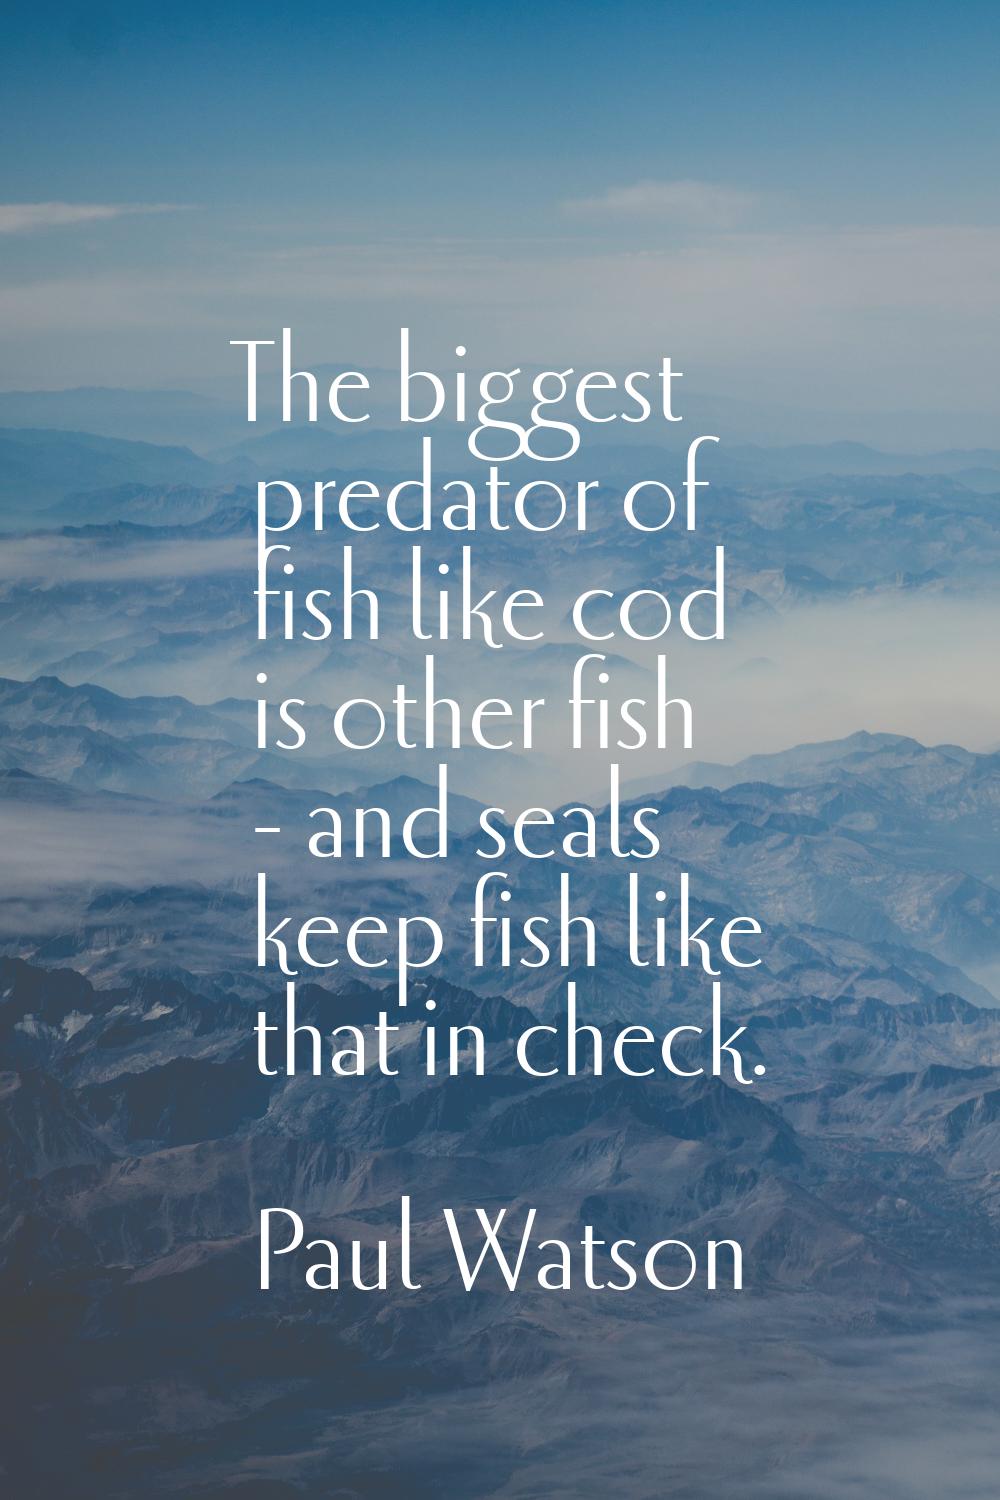 The biggest predator of fish like cod is other fish - and seals keep fish like that in check.